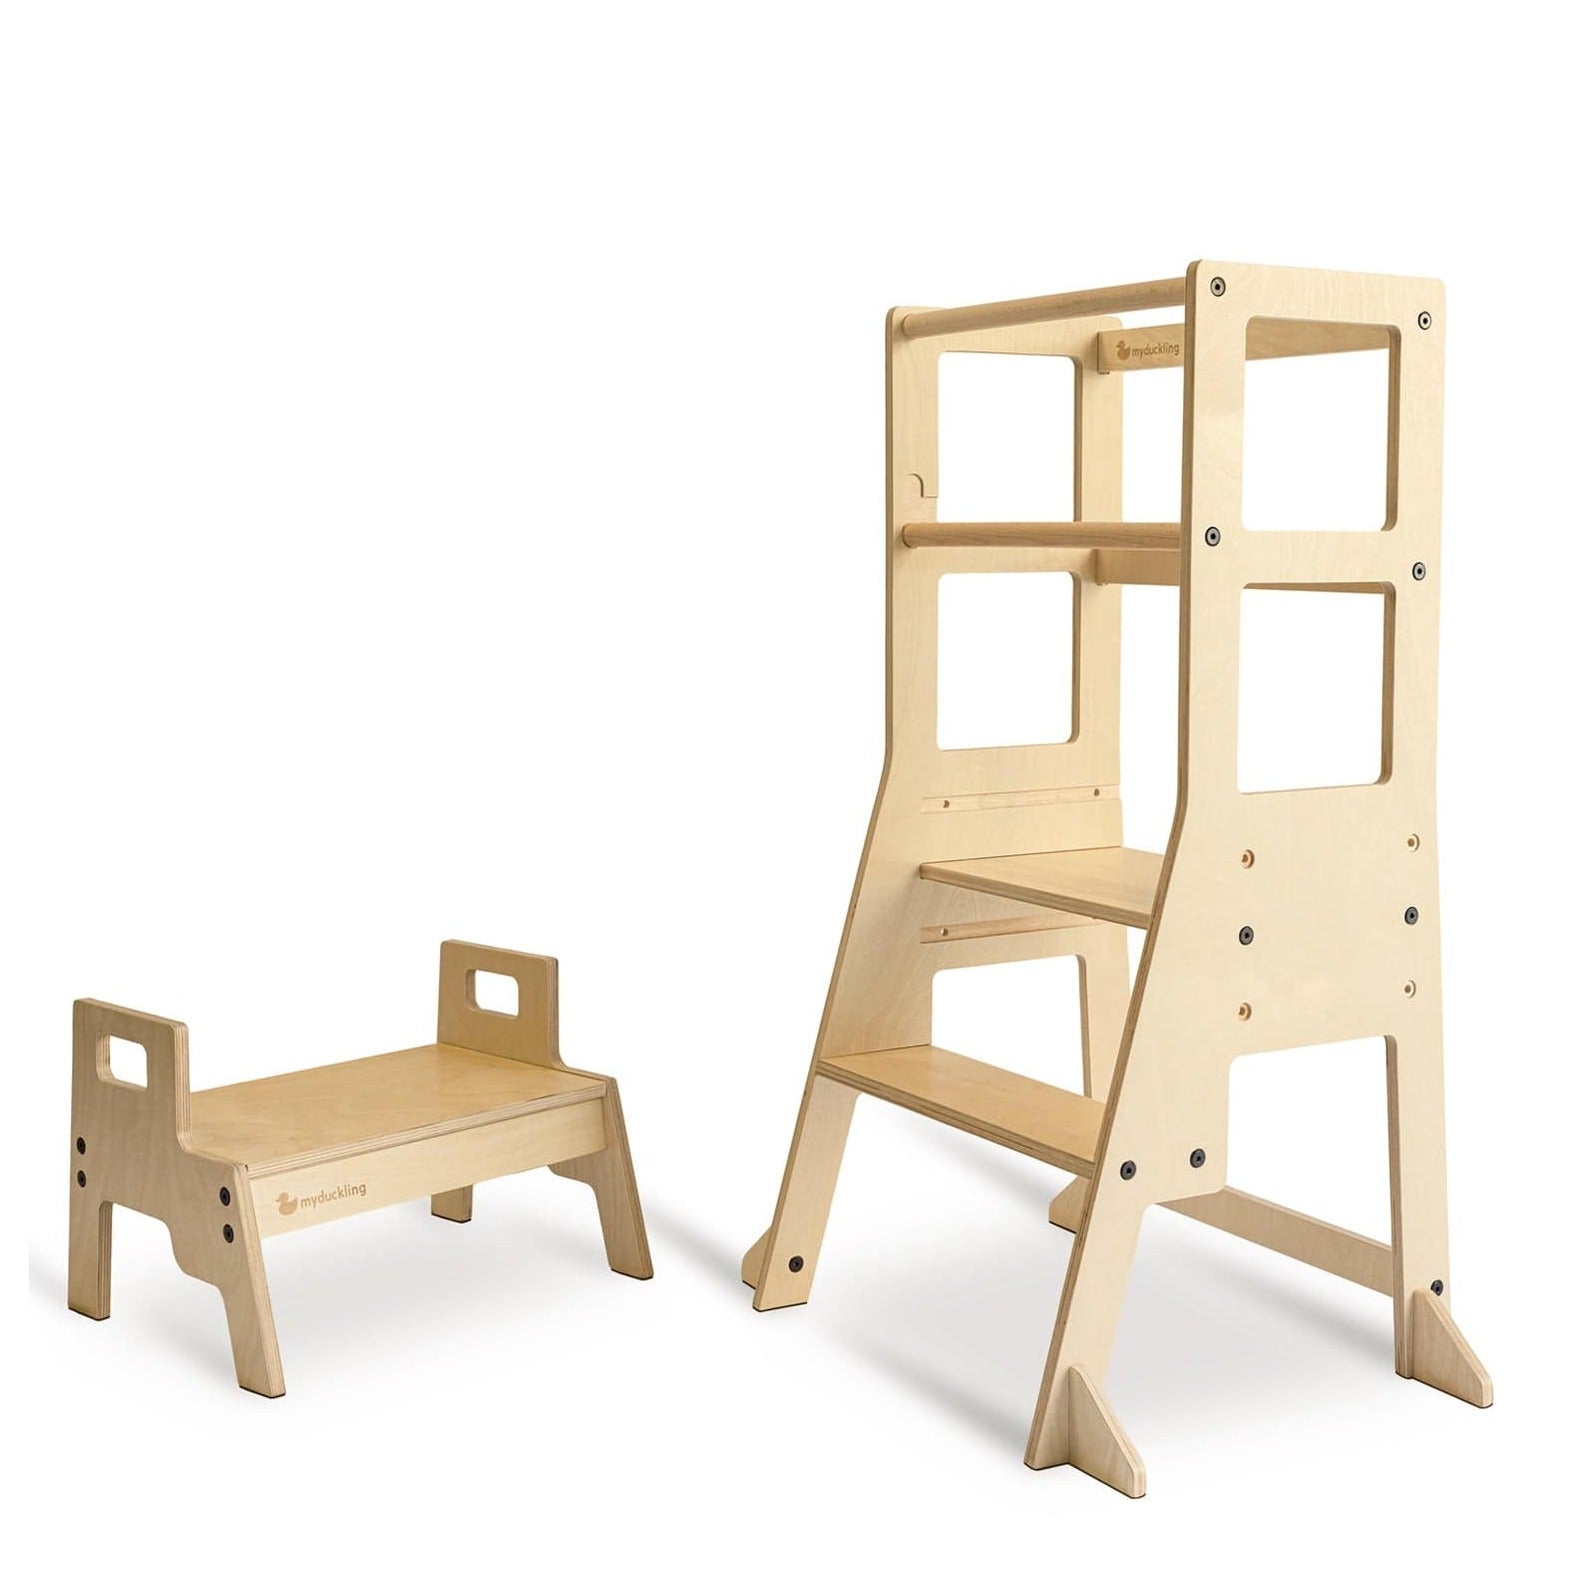 My Duckling JALA Deluxe Adjustable Learning Tower - Natural